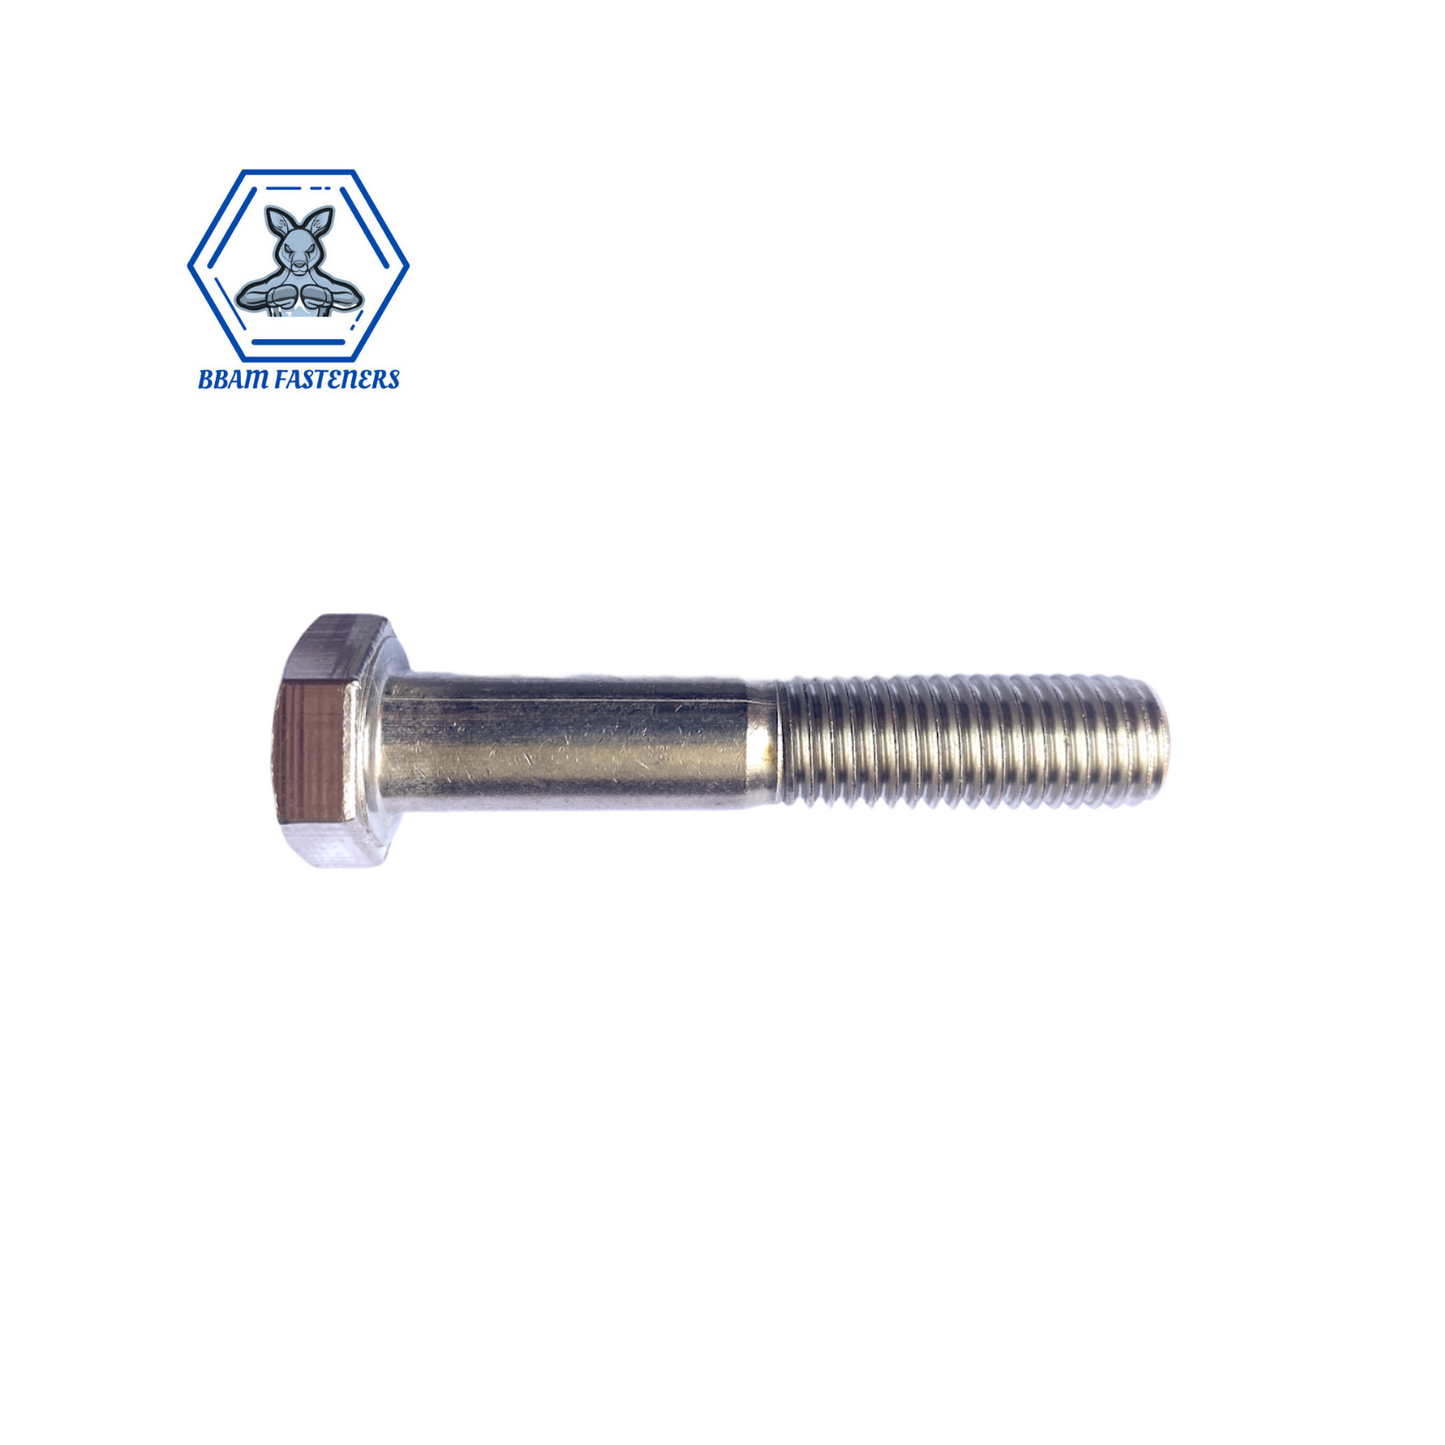 M10 x 150mm Hex Bolt 316 Stainless Steel